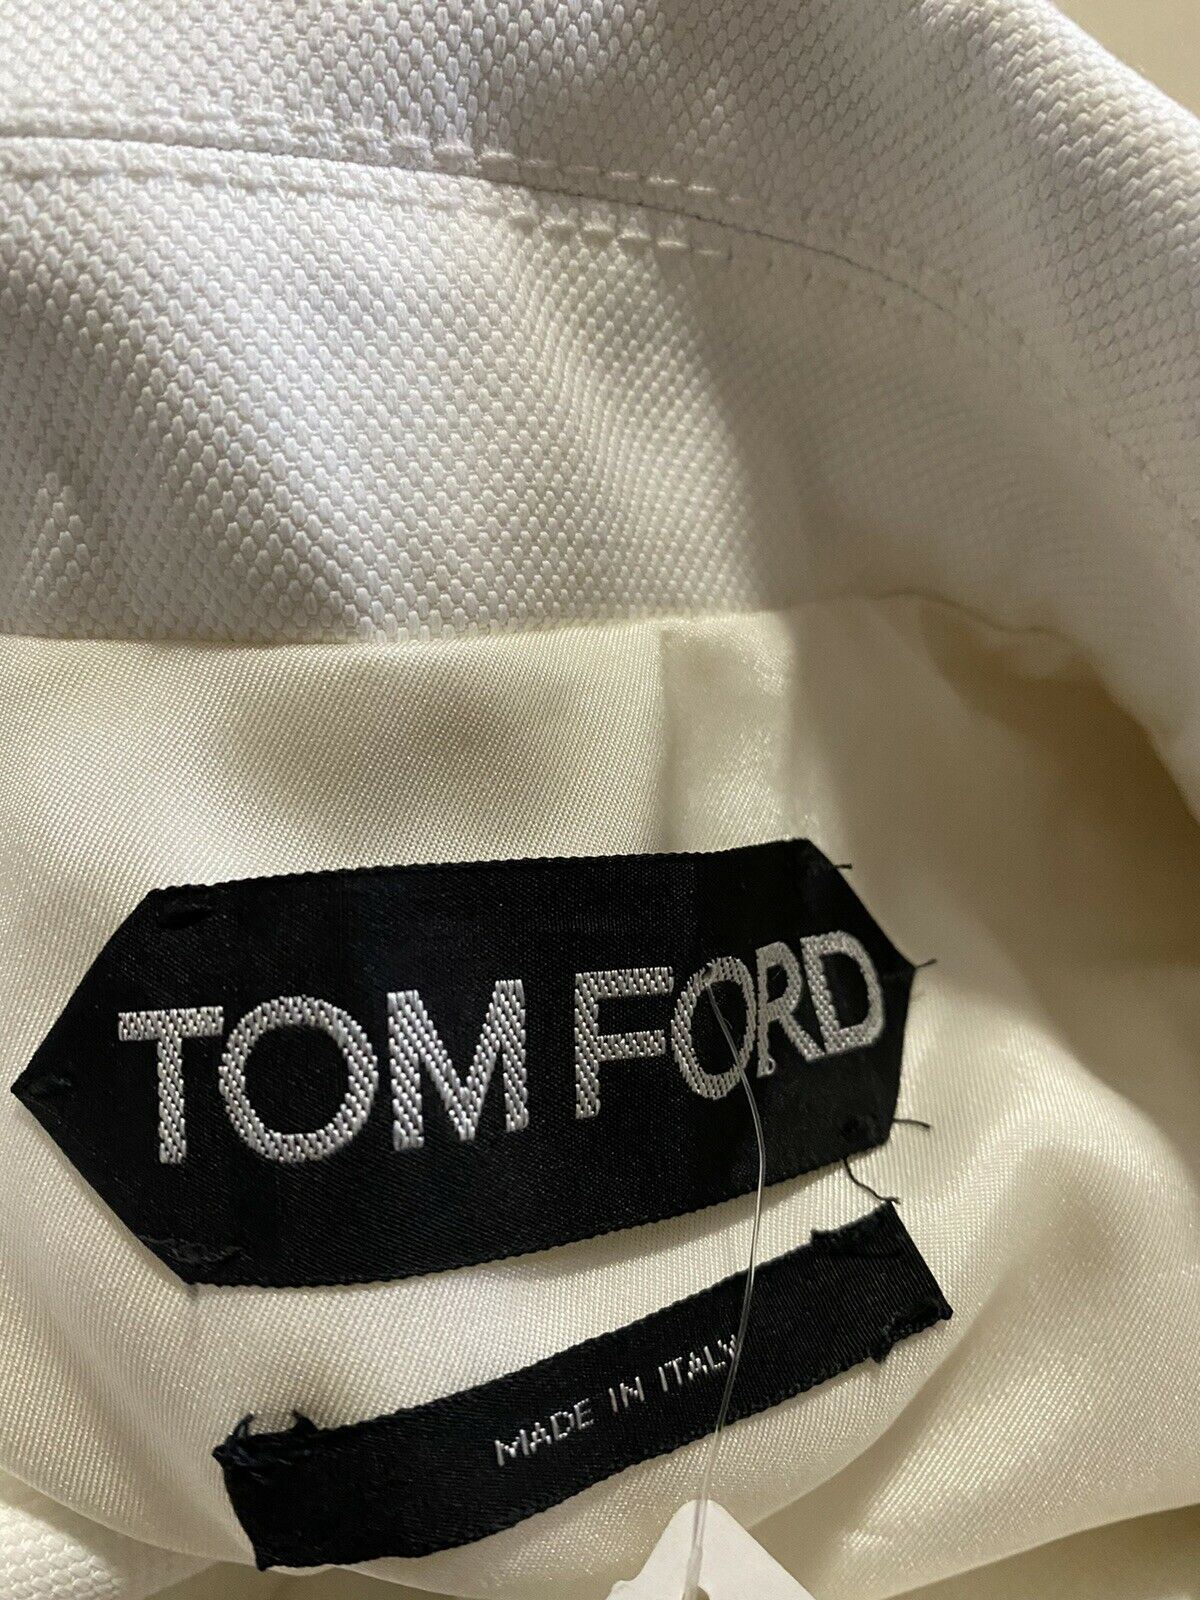 New $4950 TOM FORD Double Breasted Women Trench Coat White/Black 4 US/38 It